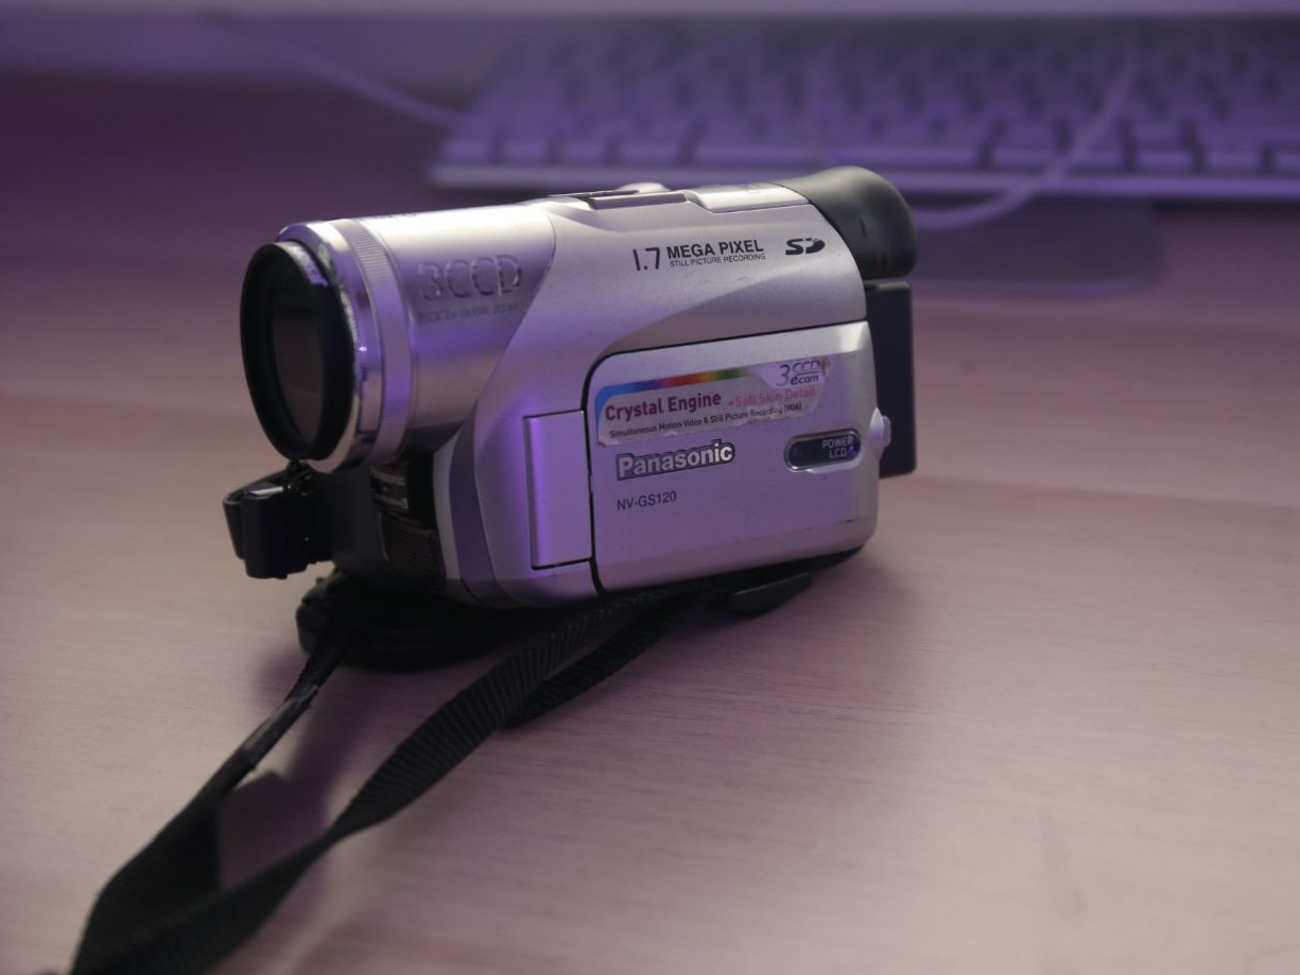 where-can-i-rent-a-minidv-camcorder